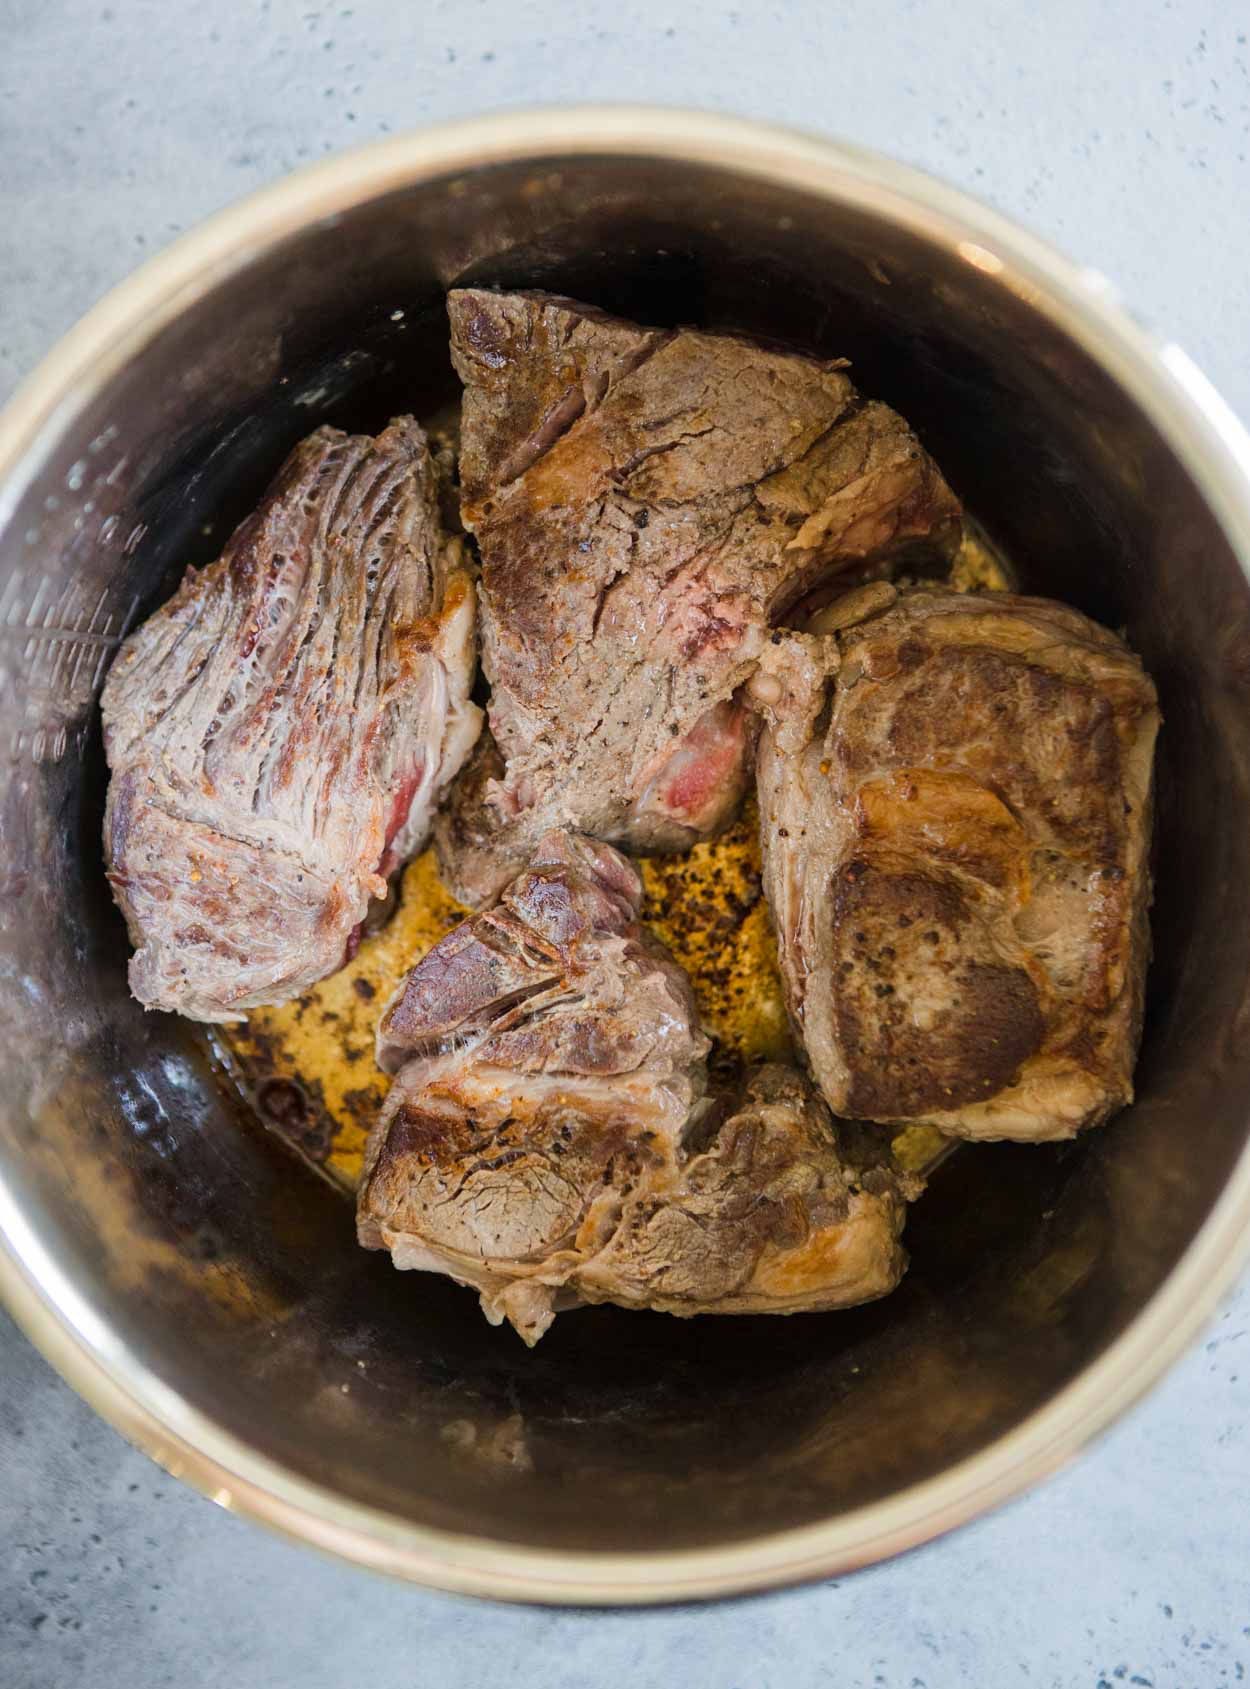 Sauteed beef chuck roast in an Instant Pot